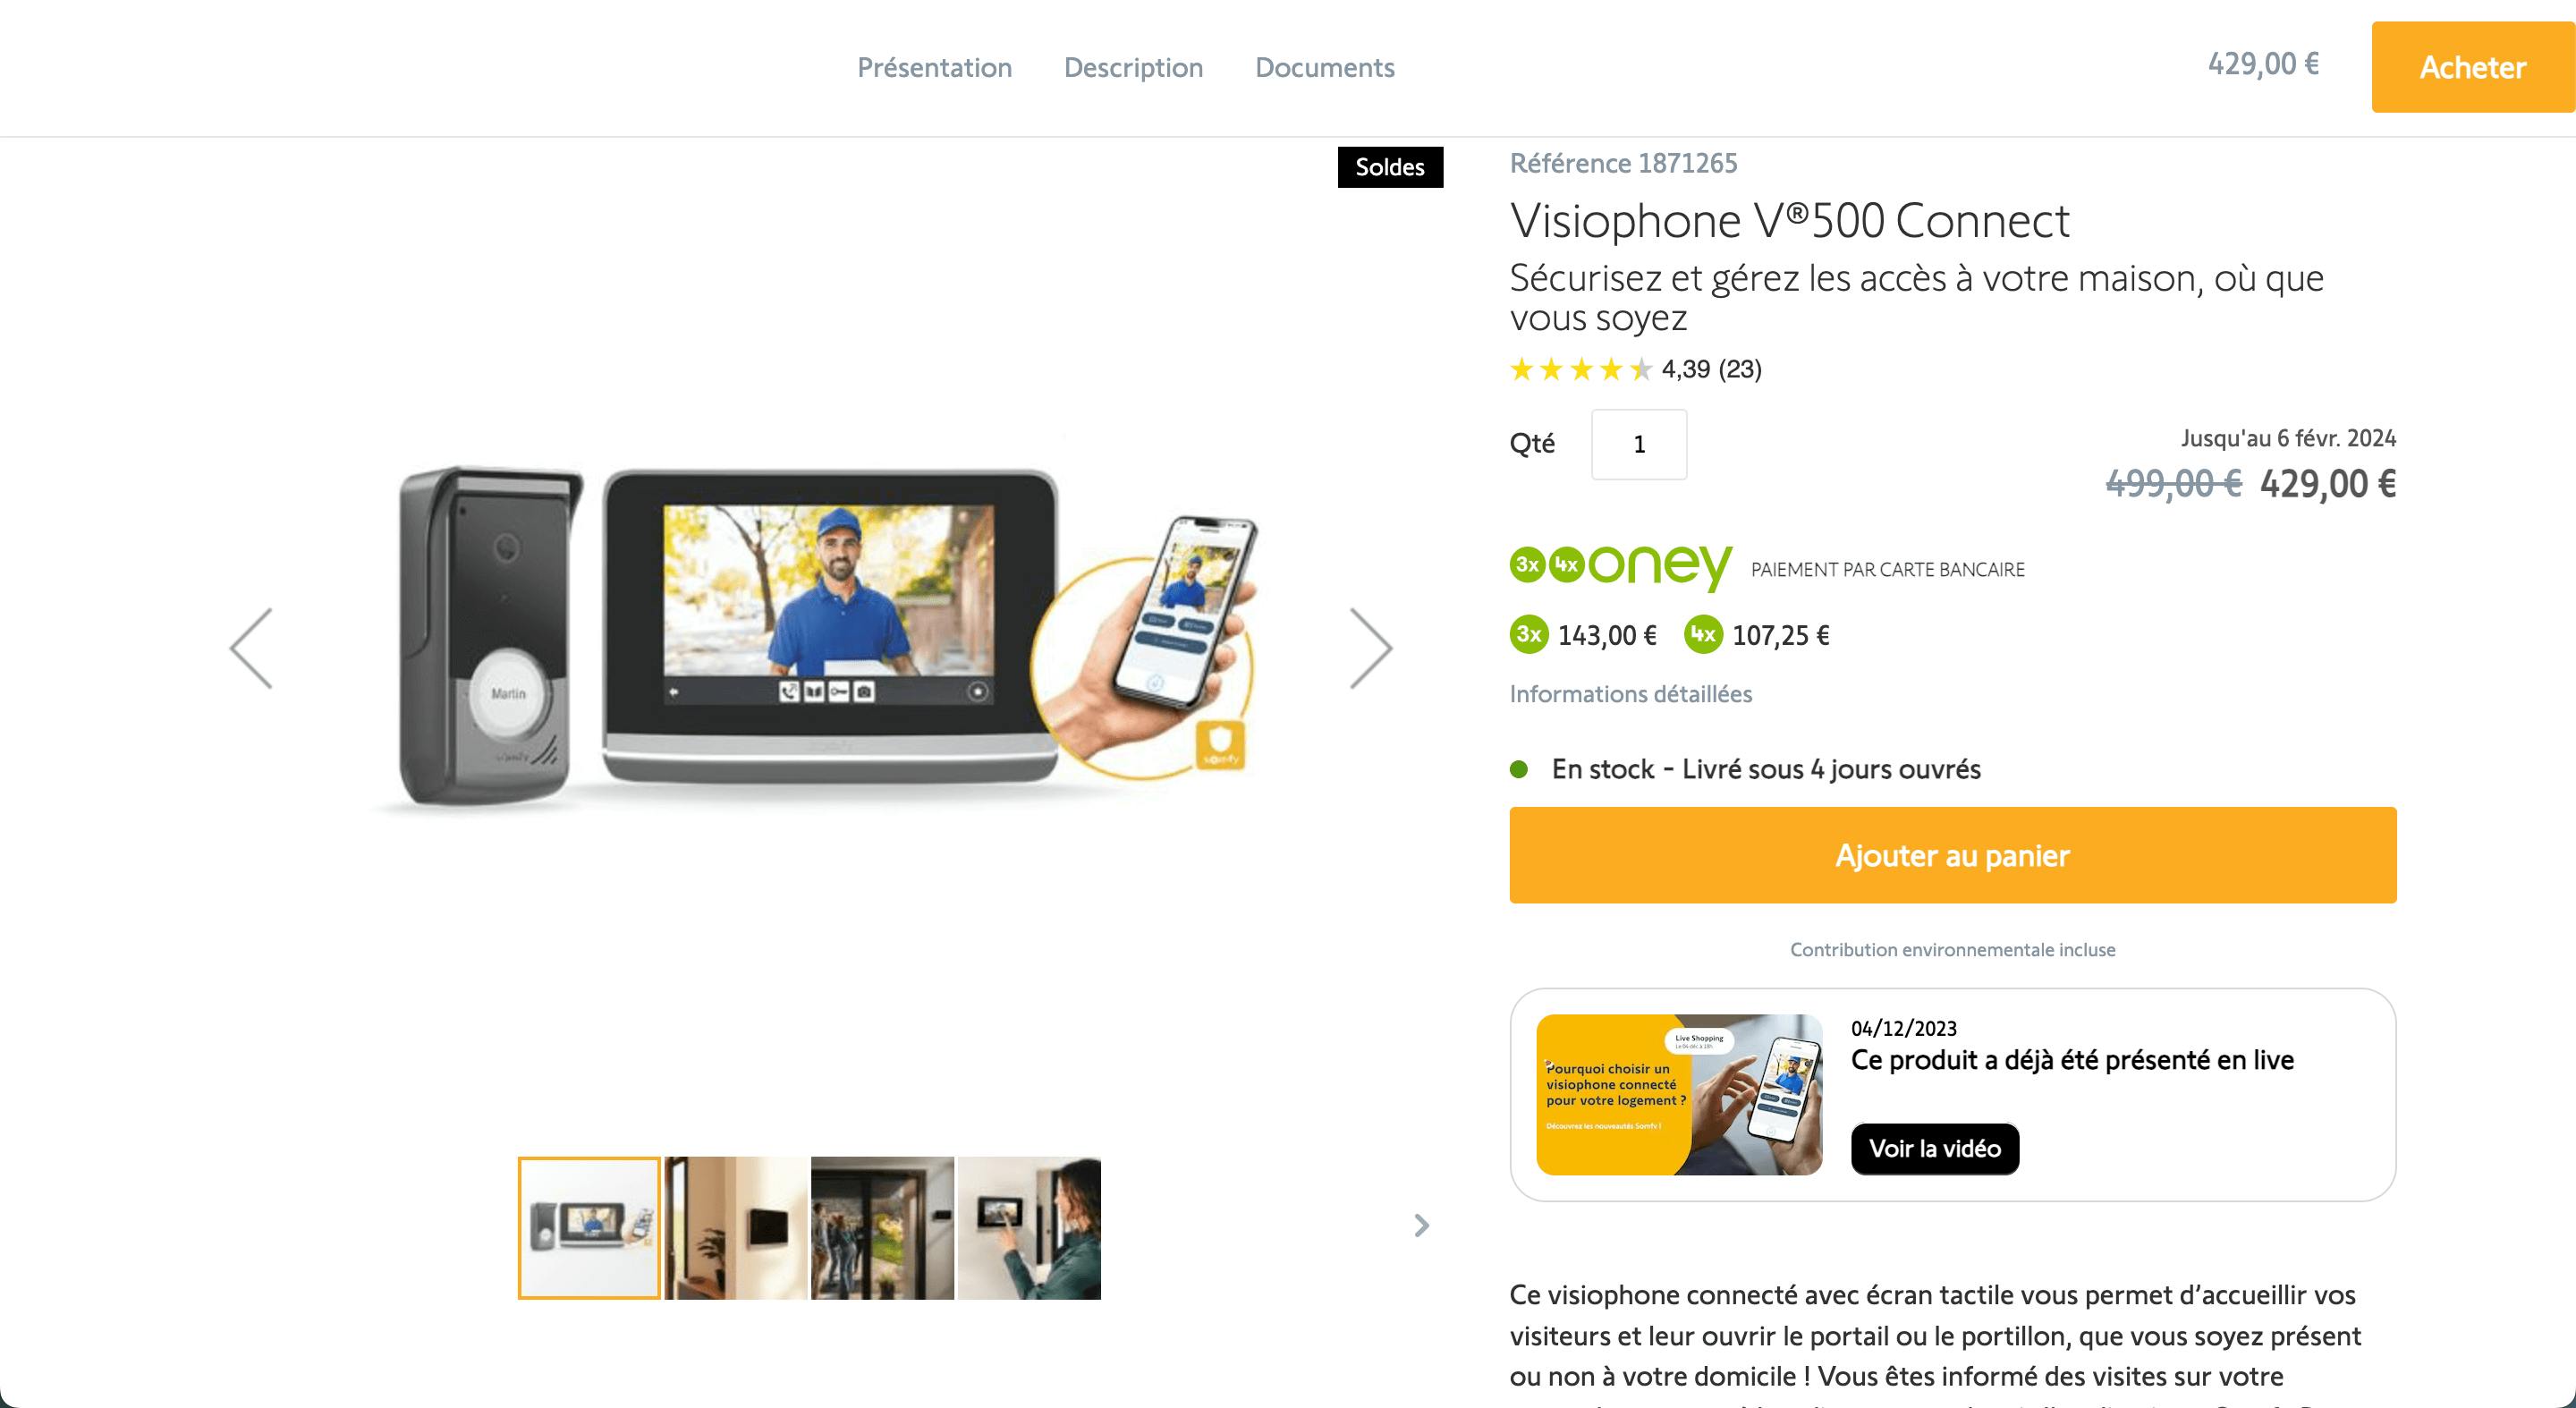 Somfy product page